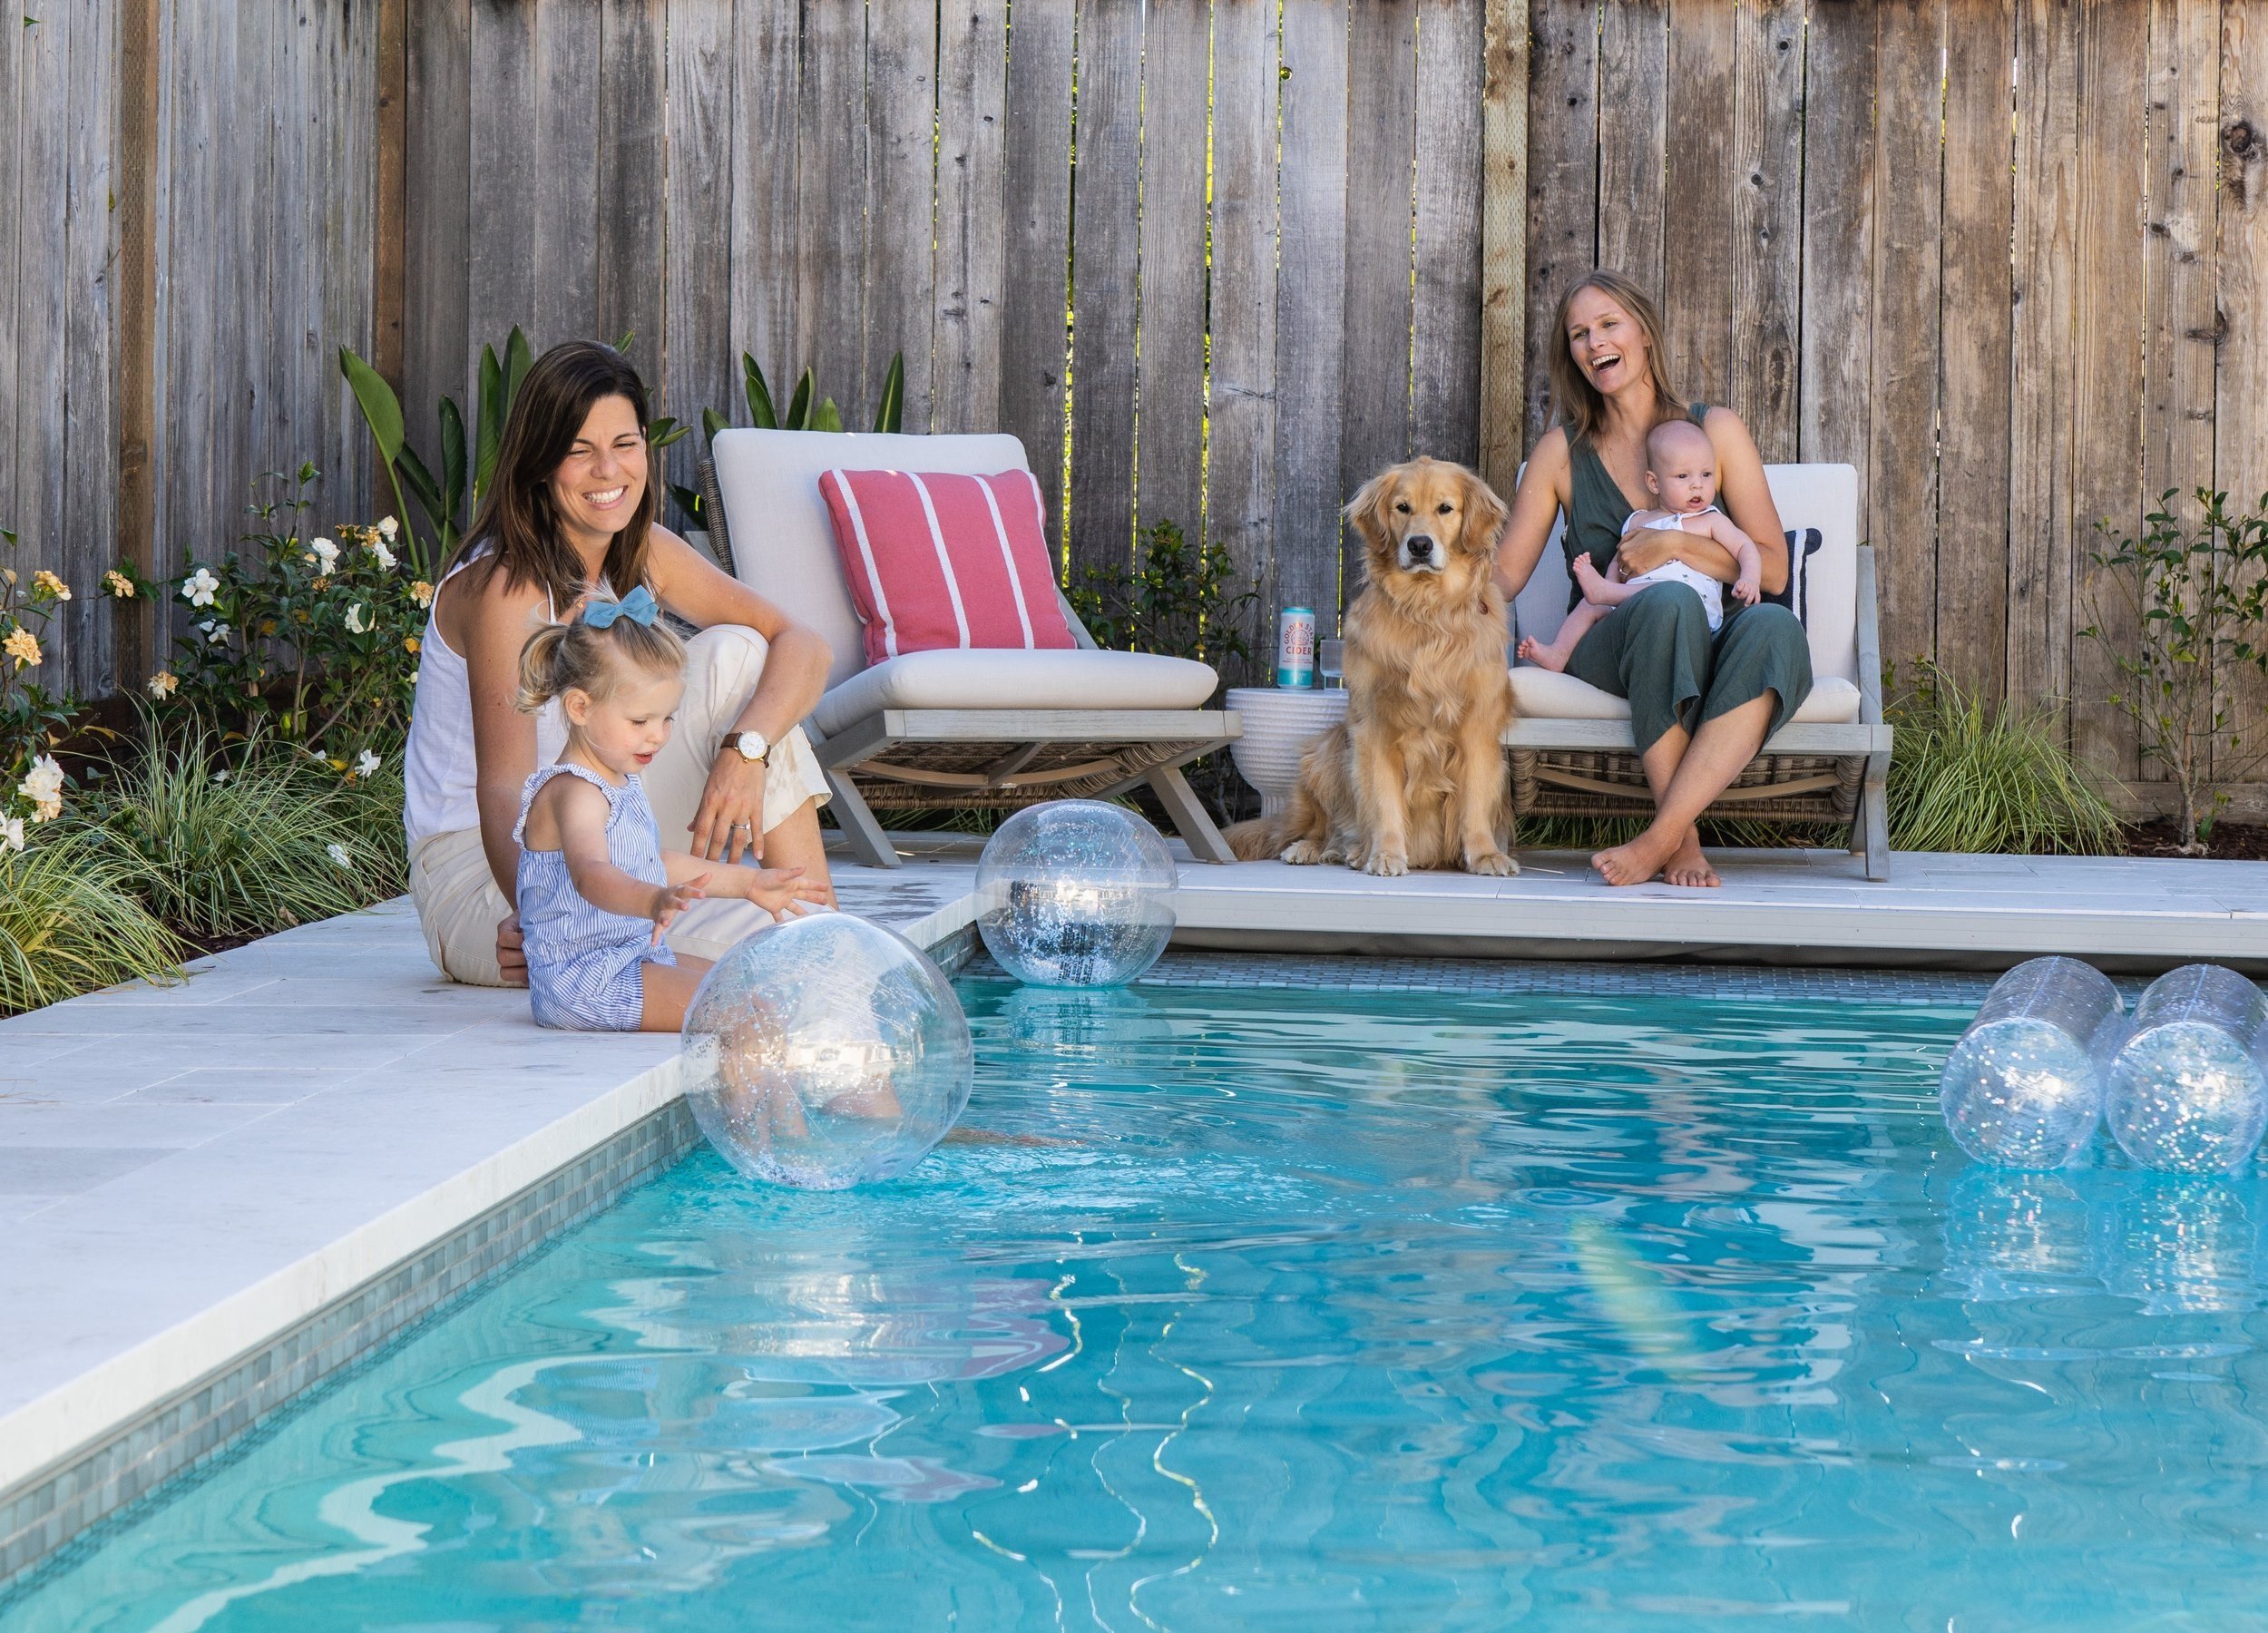 Two women, a girl, baby and dog sitting by a pool in a fenced space